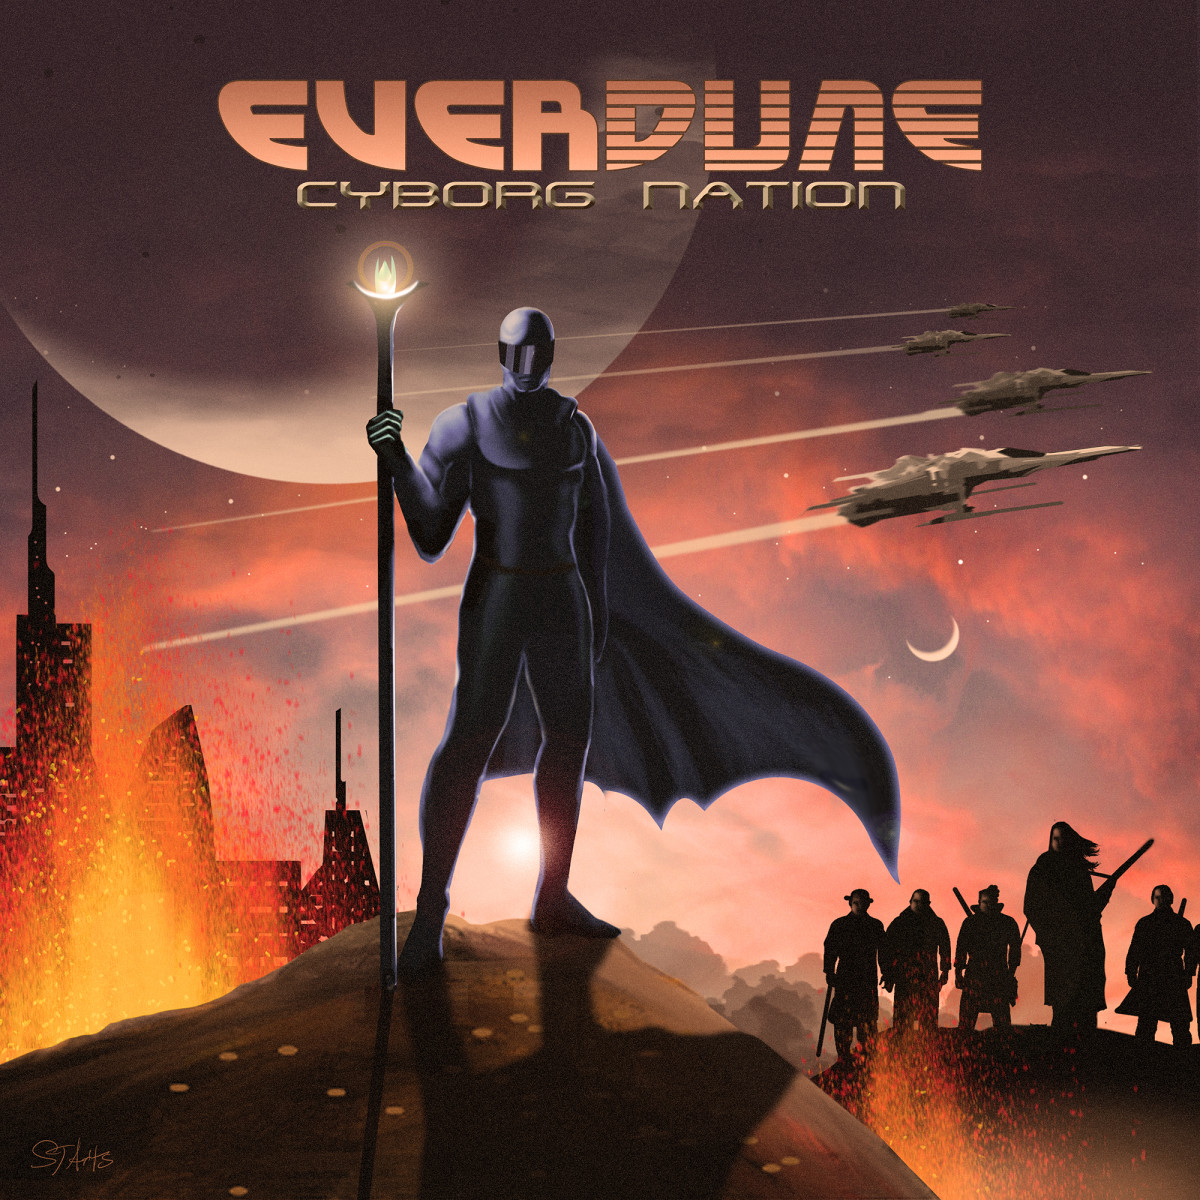 synth-album-review-cyborg-nation-by-everdune